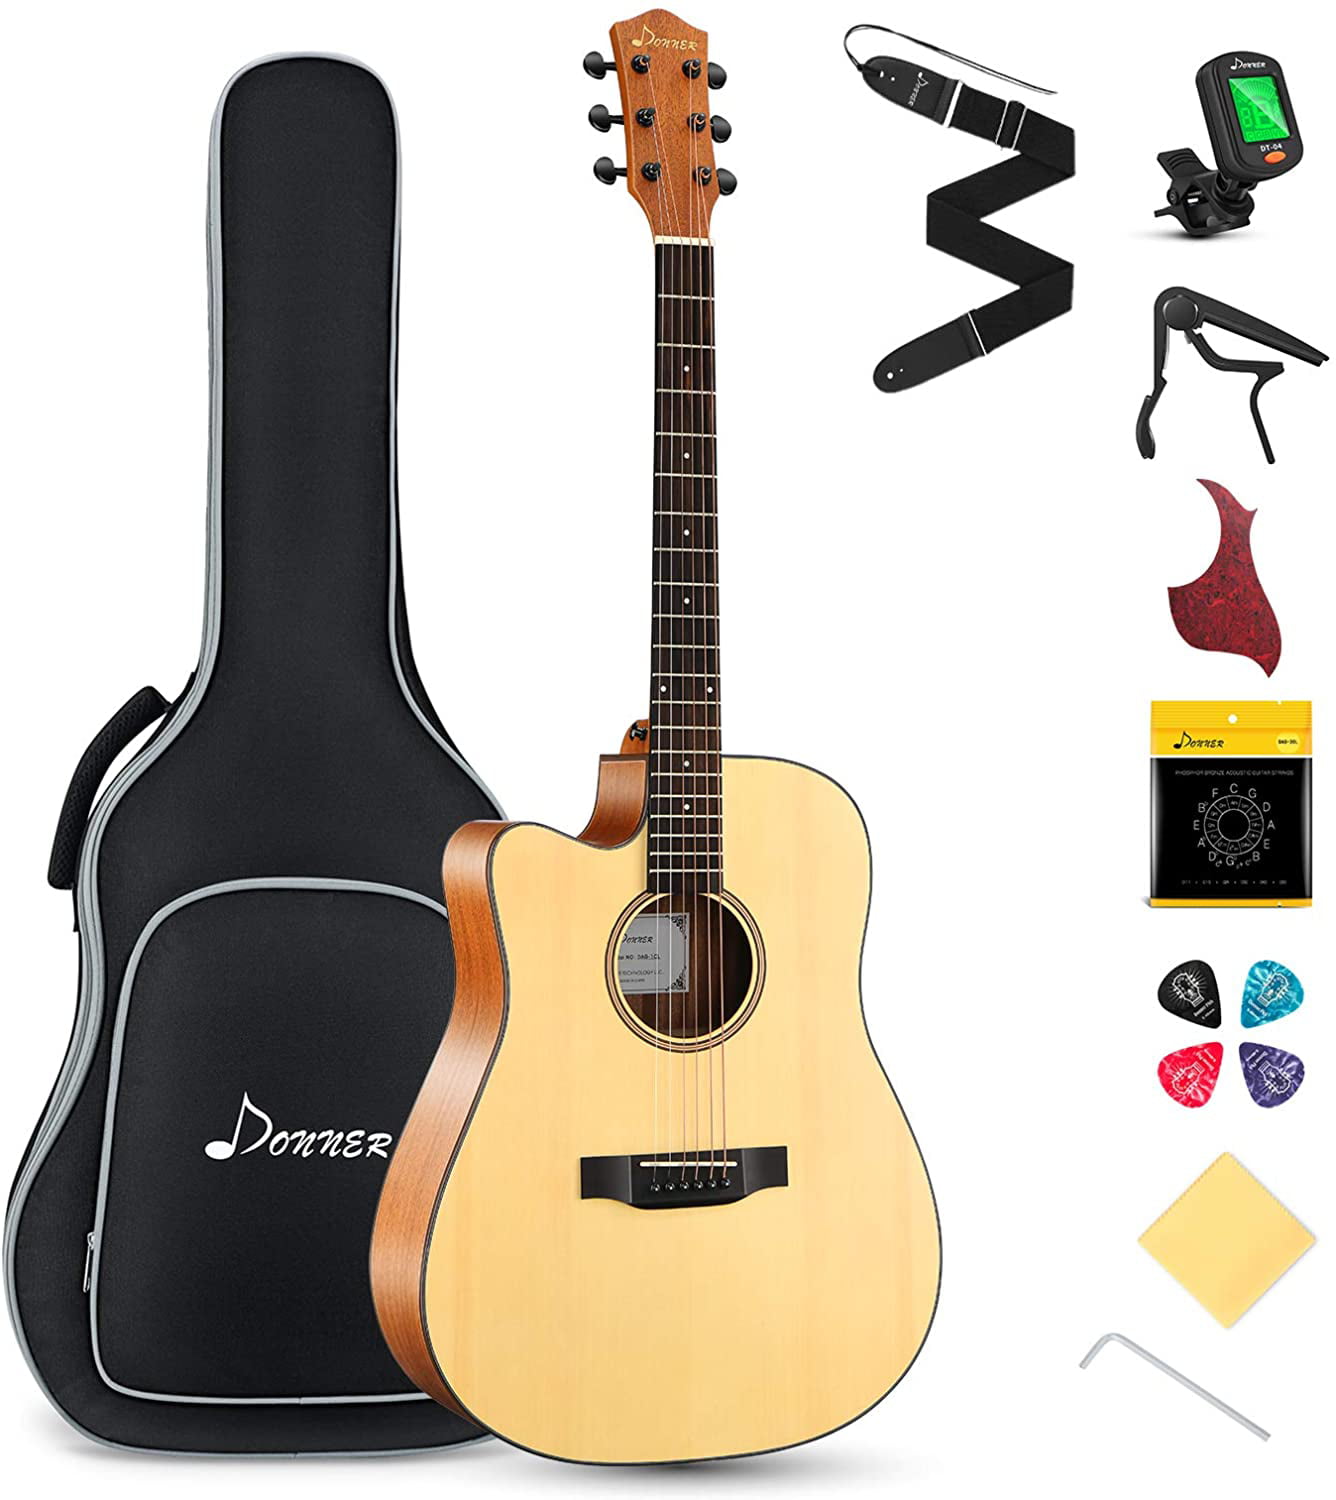 Gig Bag, Strap, Pick all accessories Acoustic Electric Guitar,41 Inch Professional Cutaway Full-size Dreadnought Folk Beginner Kit Top Spruce 6 Metal Strings with Guitarra Bundle 